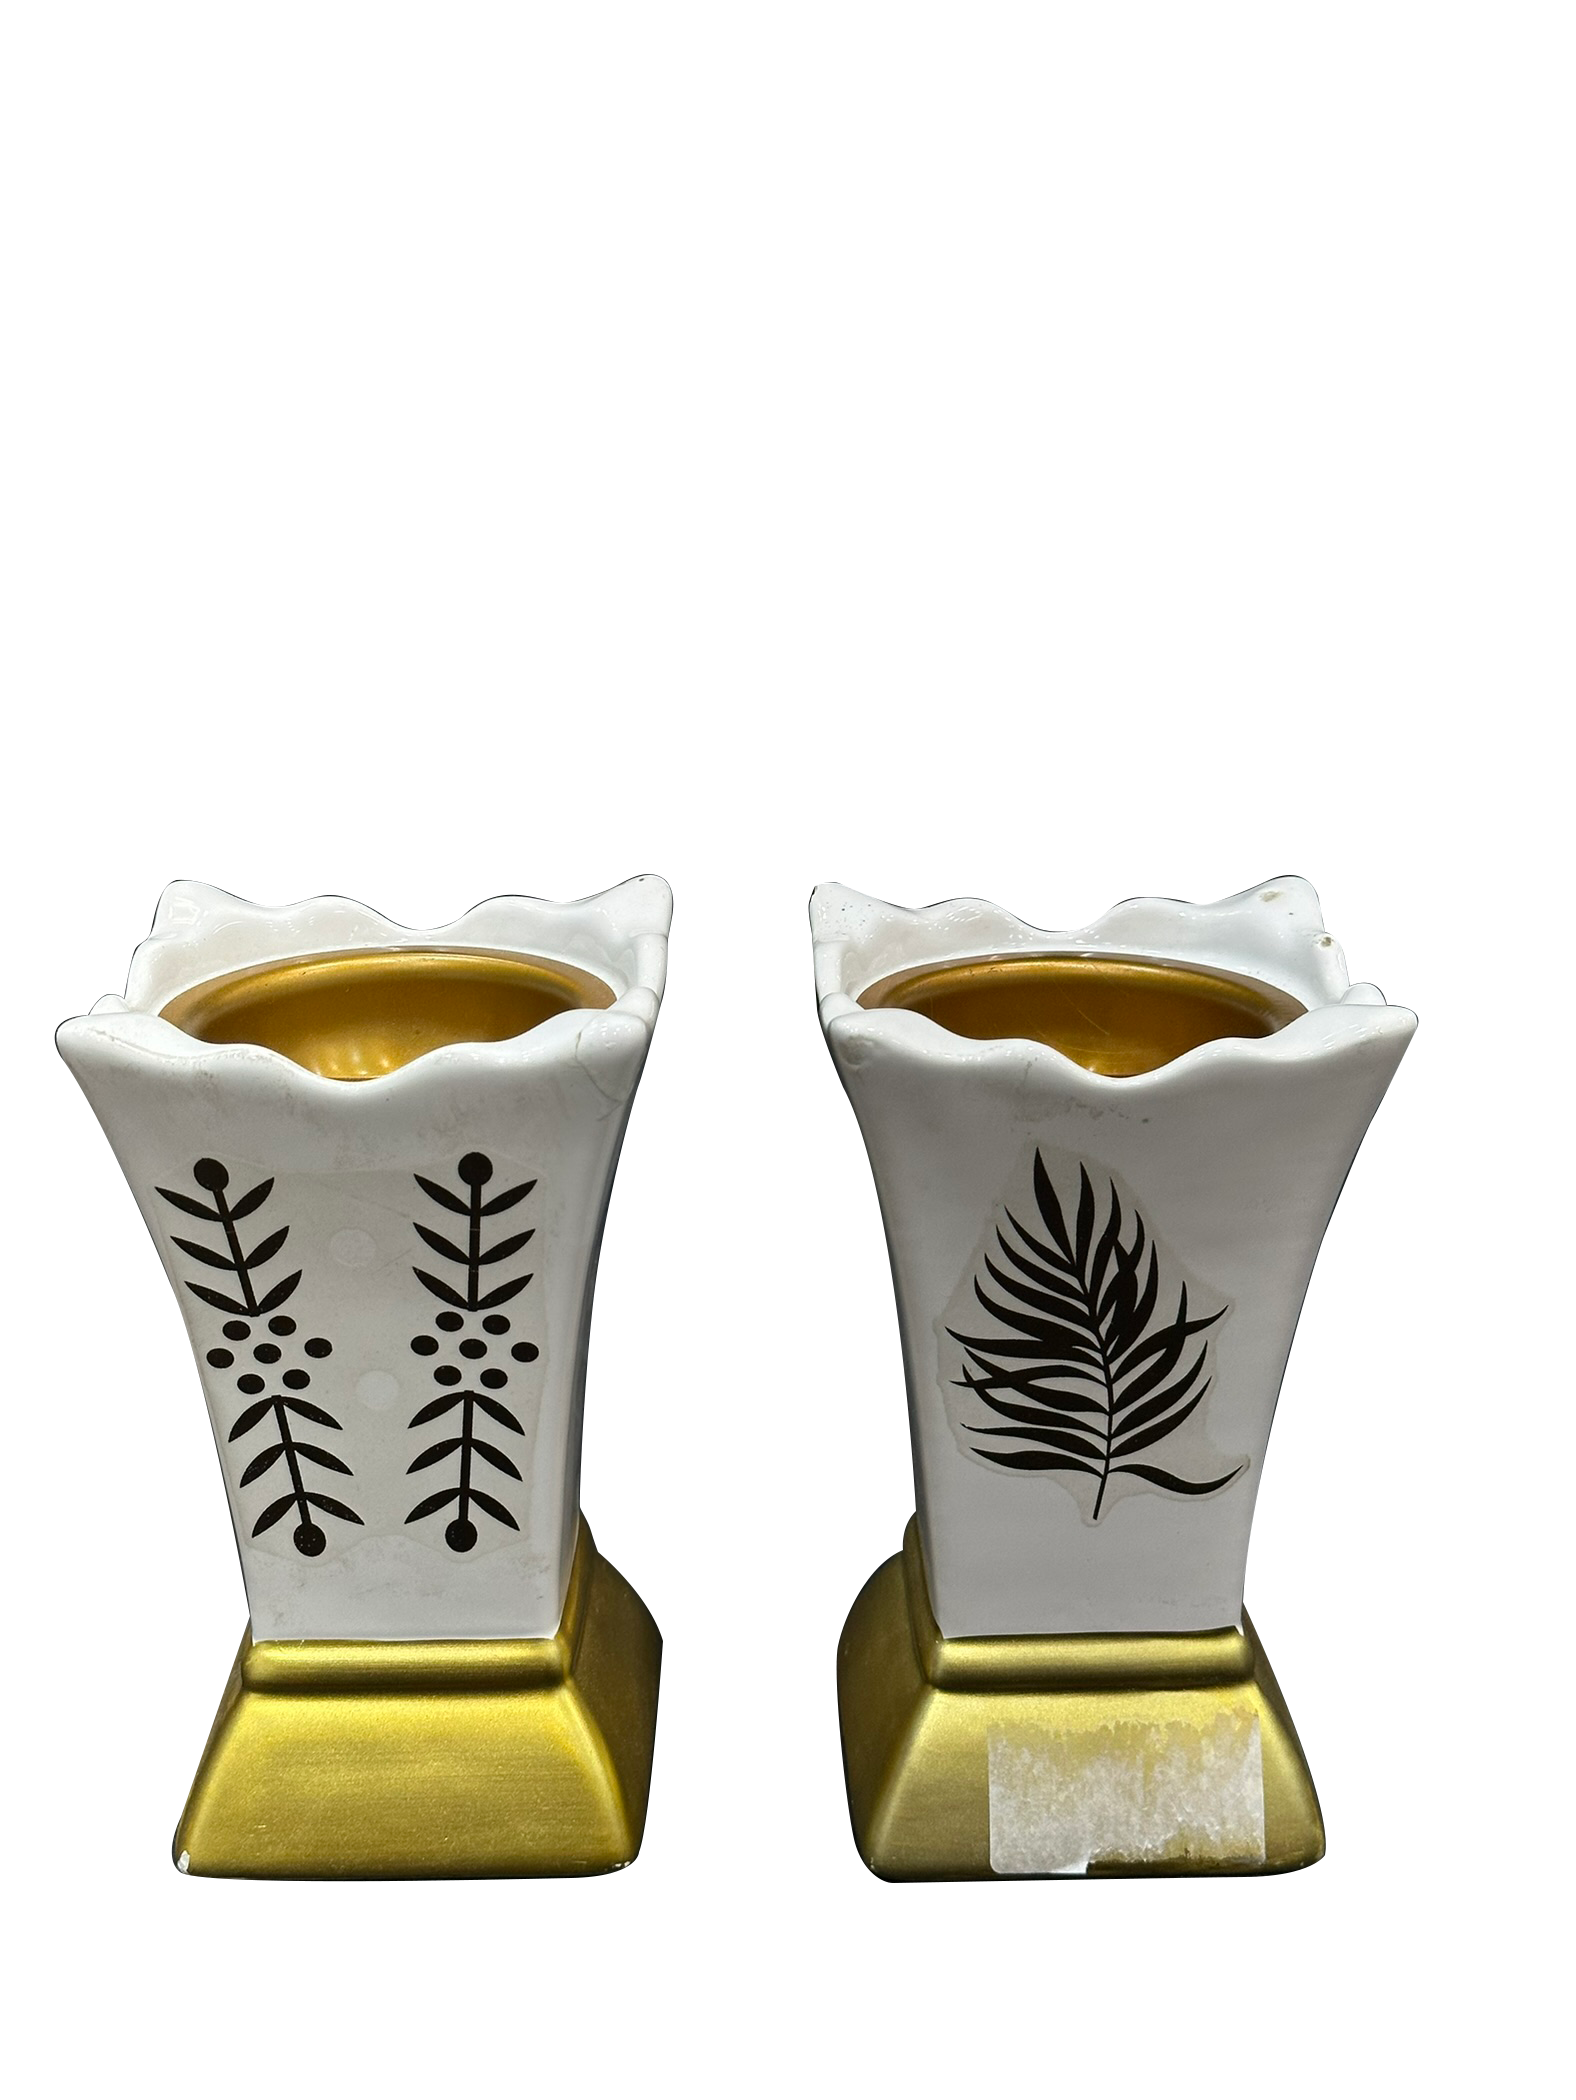 Leafy Pattern White Ceramic Incense Burners - Sunset Gifts Store